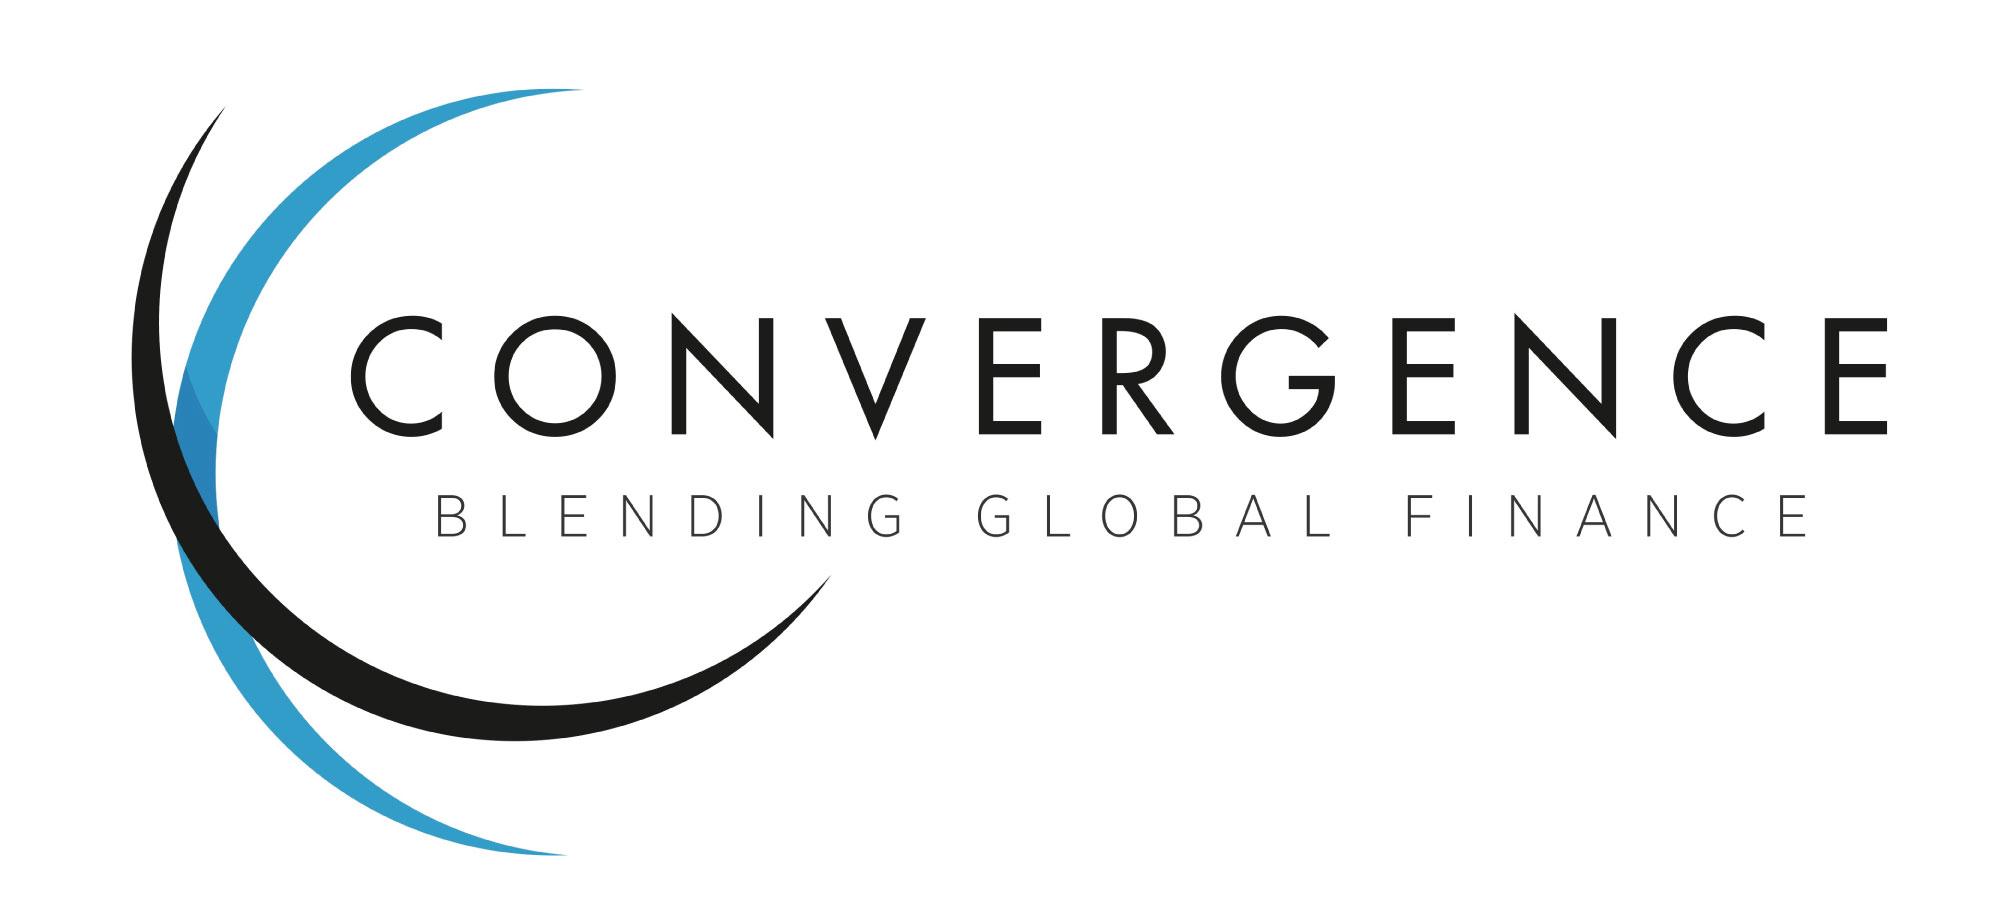 Convergence and AVPA Deepen Partnership to Grow the Blended Finance Ecosystem across Africa